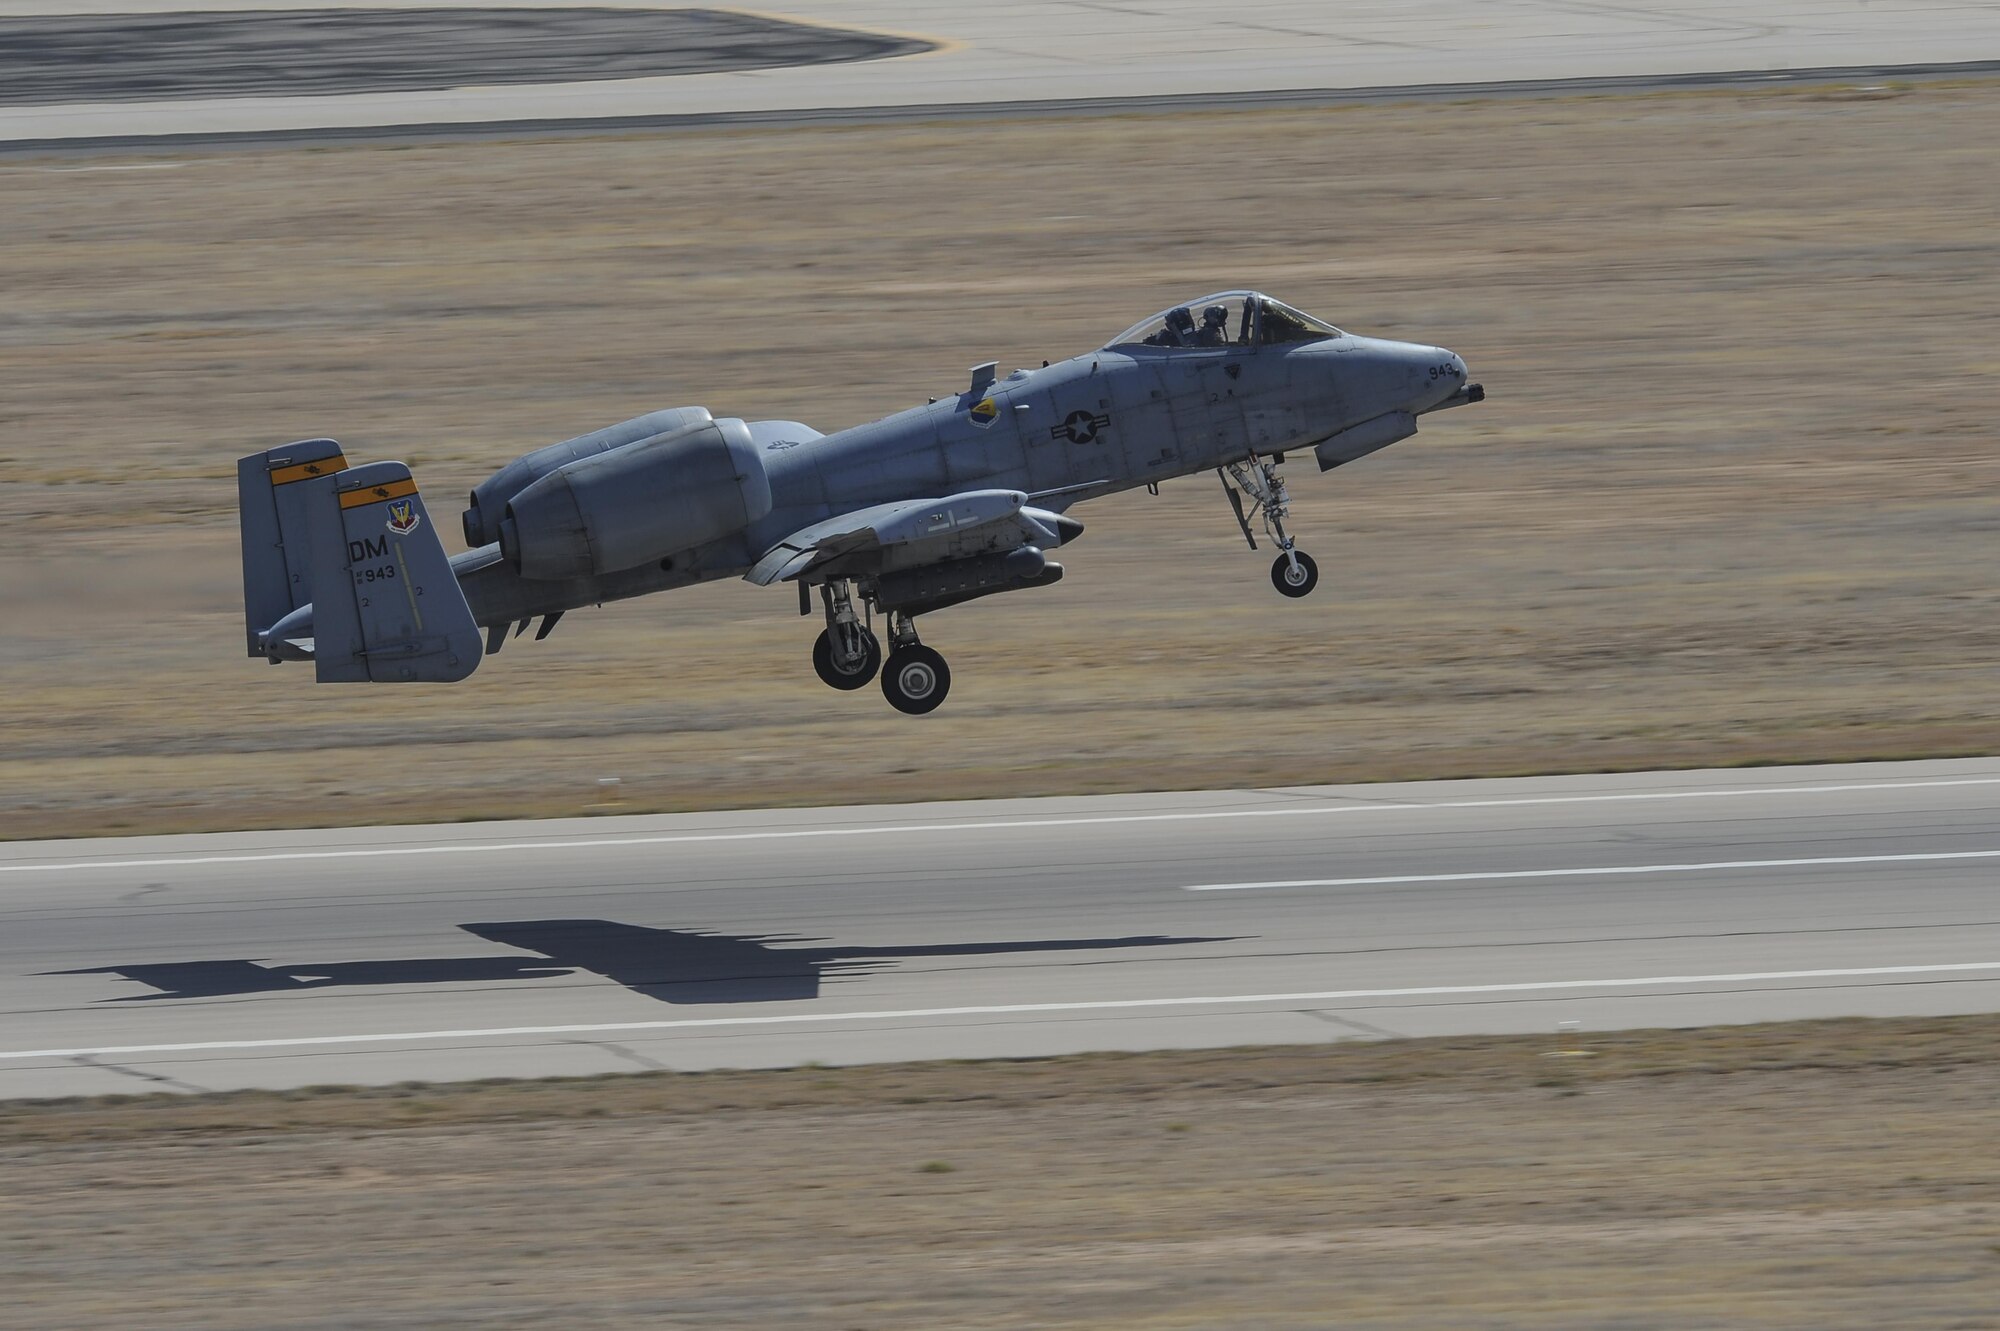 A U.S. Air Force A-10C Thunderbolt II assigned to the 357th Fighter Squadron takes off from the flight line at Davis-Monthan Air Force Base, Ariz., July 12, 2017. The aircraft can survive direct hits from armor-piercing and high explosive projectiles.(U.S. Air Force photo by Senior Airman Mya M. Crosby)